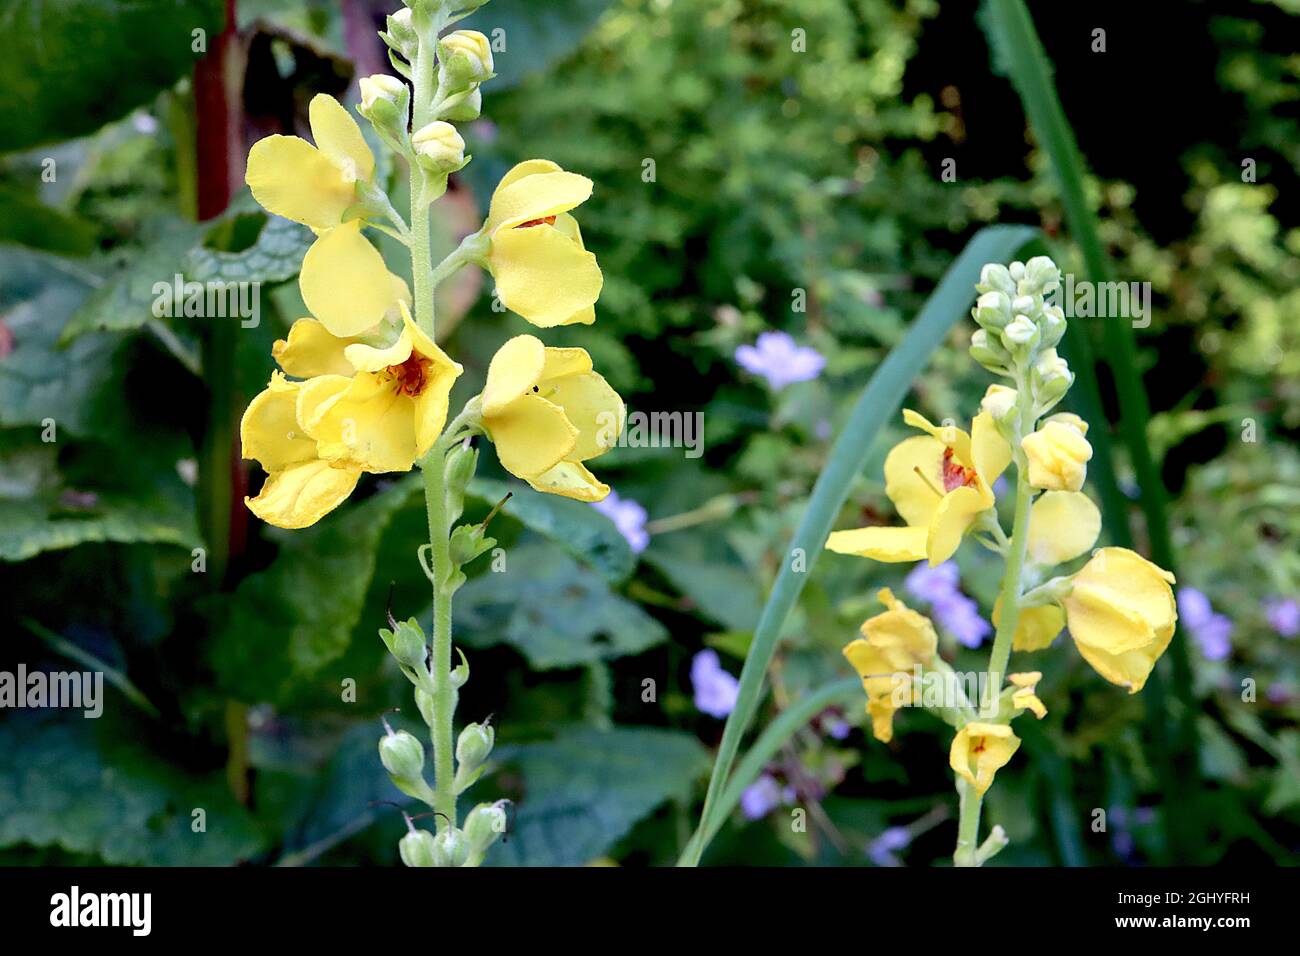 Verbascum chaixii yellow yellow nettle-leaved mullein- loose flower spikes of yellow bowl-shaped flowers with fluffy purple stamens, August, England, Stock Photo